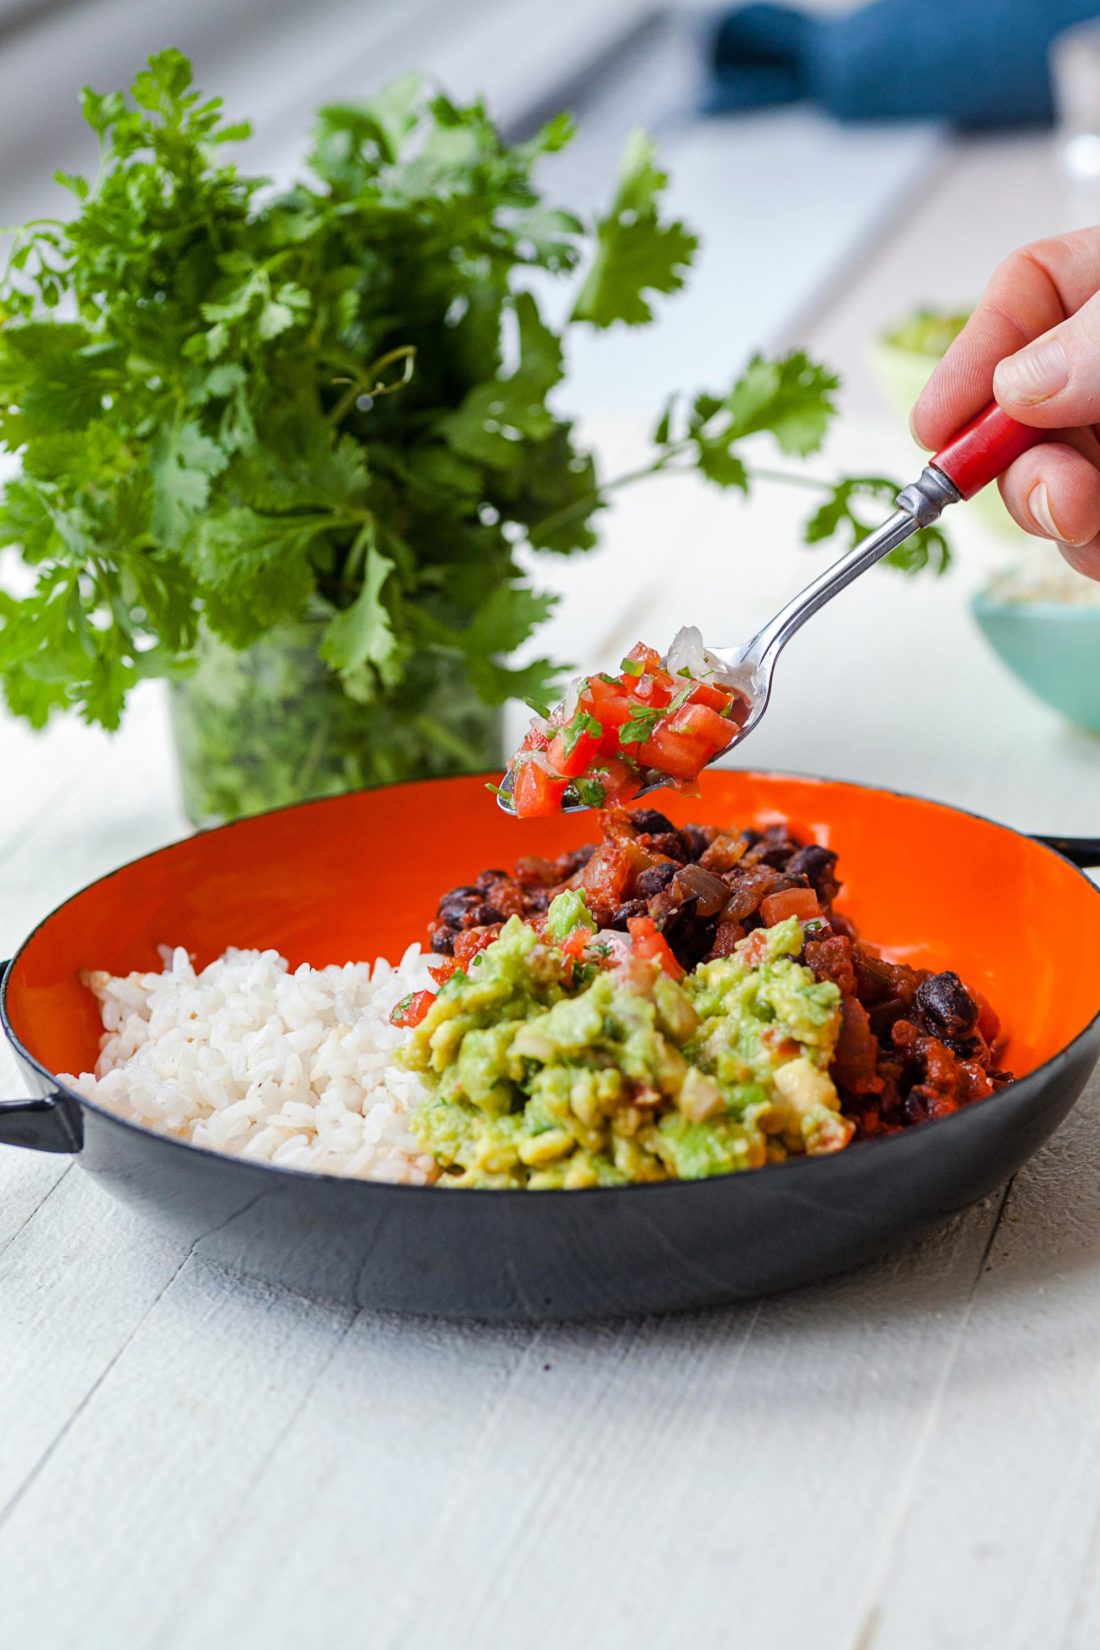 Spoon adding salsa to a bowl with guacamole, Black Beans, and Rice.